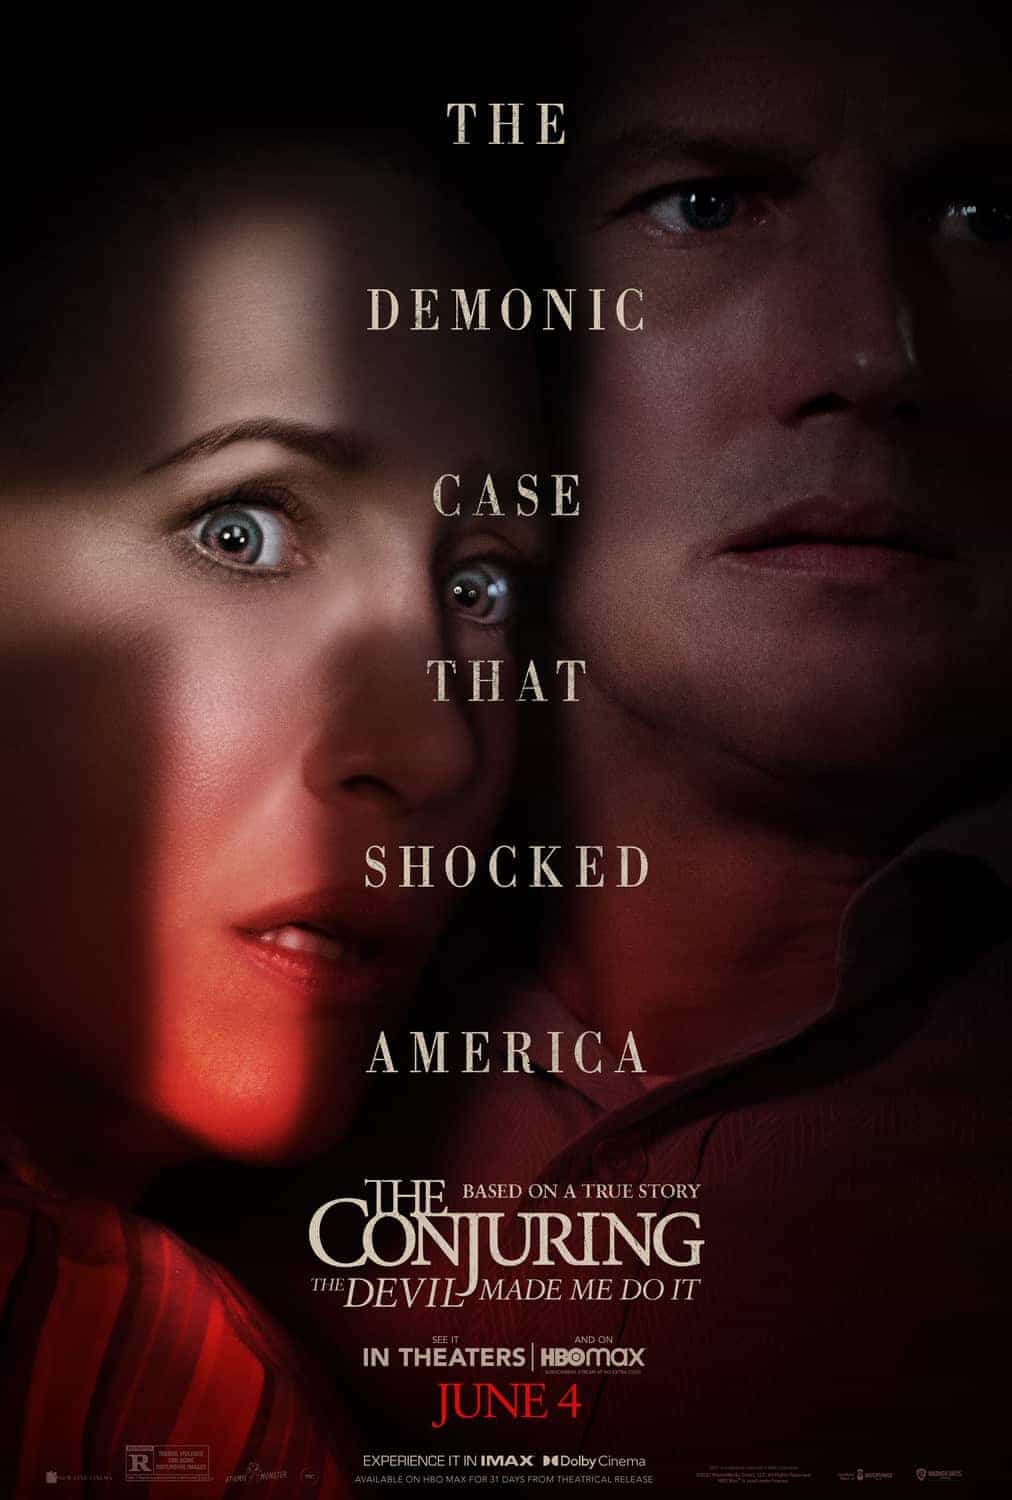 New trailer for The Conjuring: The Devil Made Me Do It - movie released 28th May 2021 in the UK